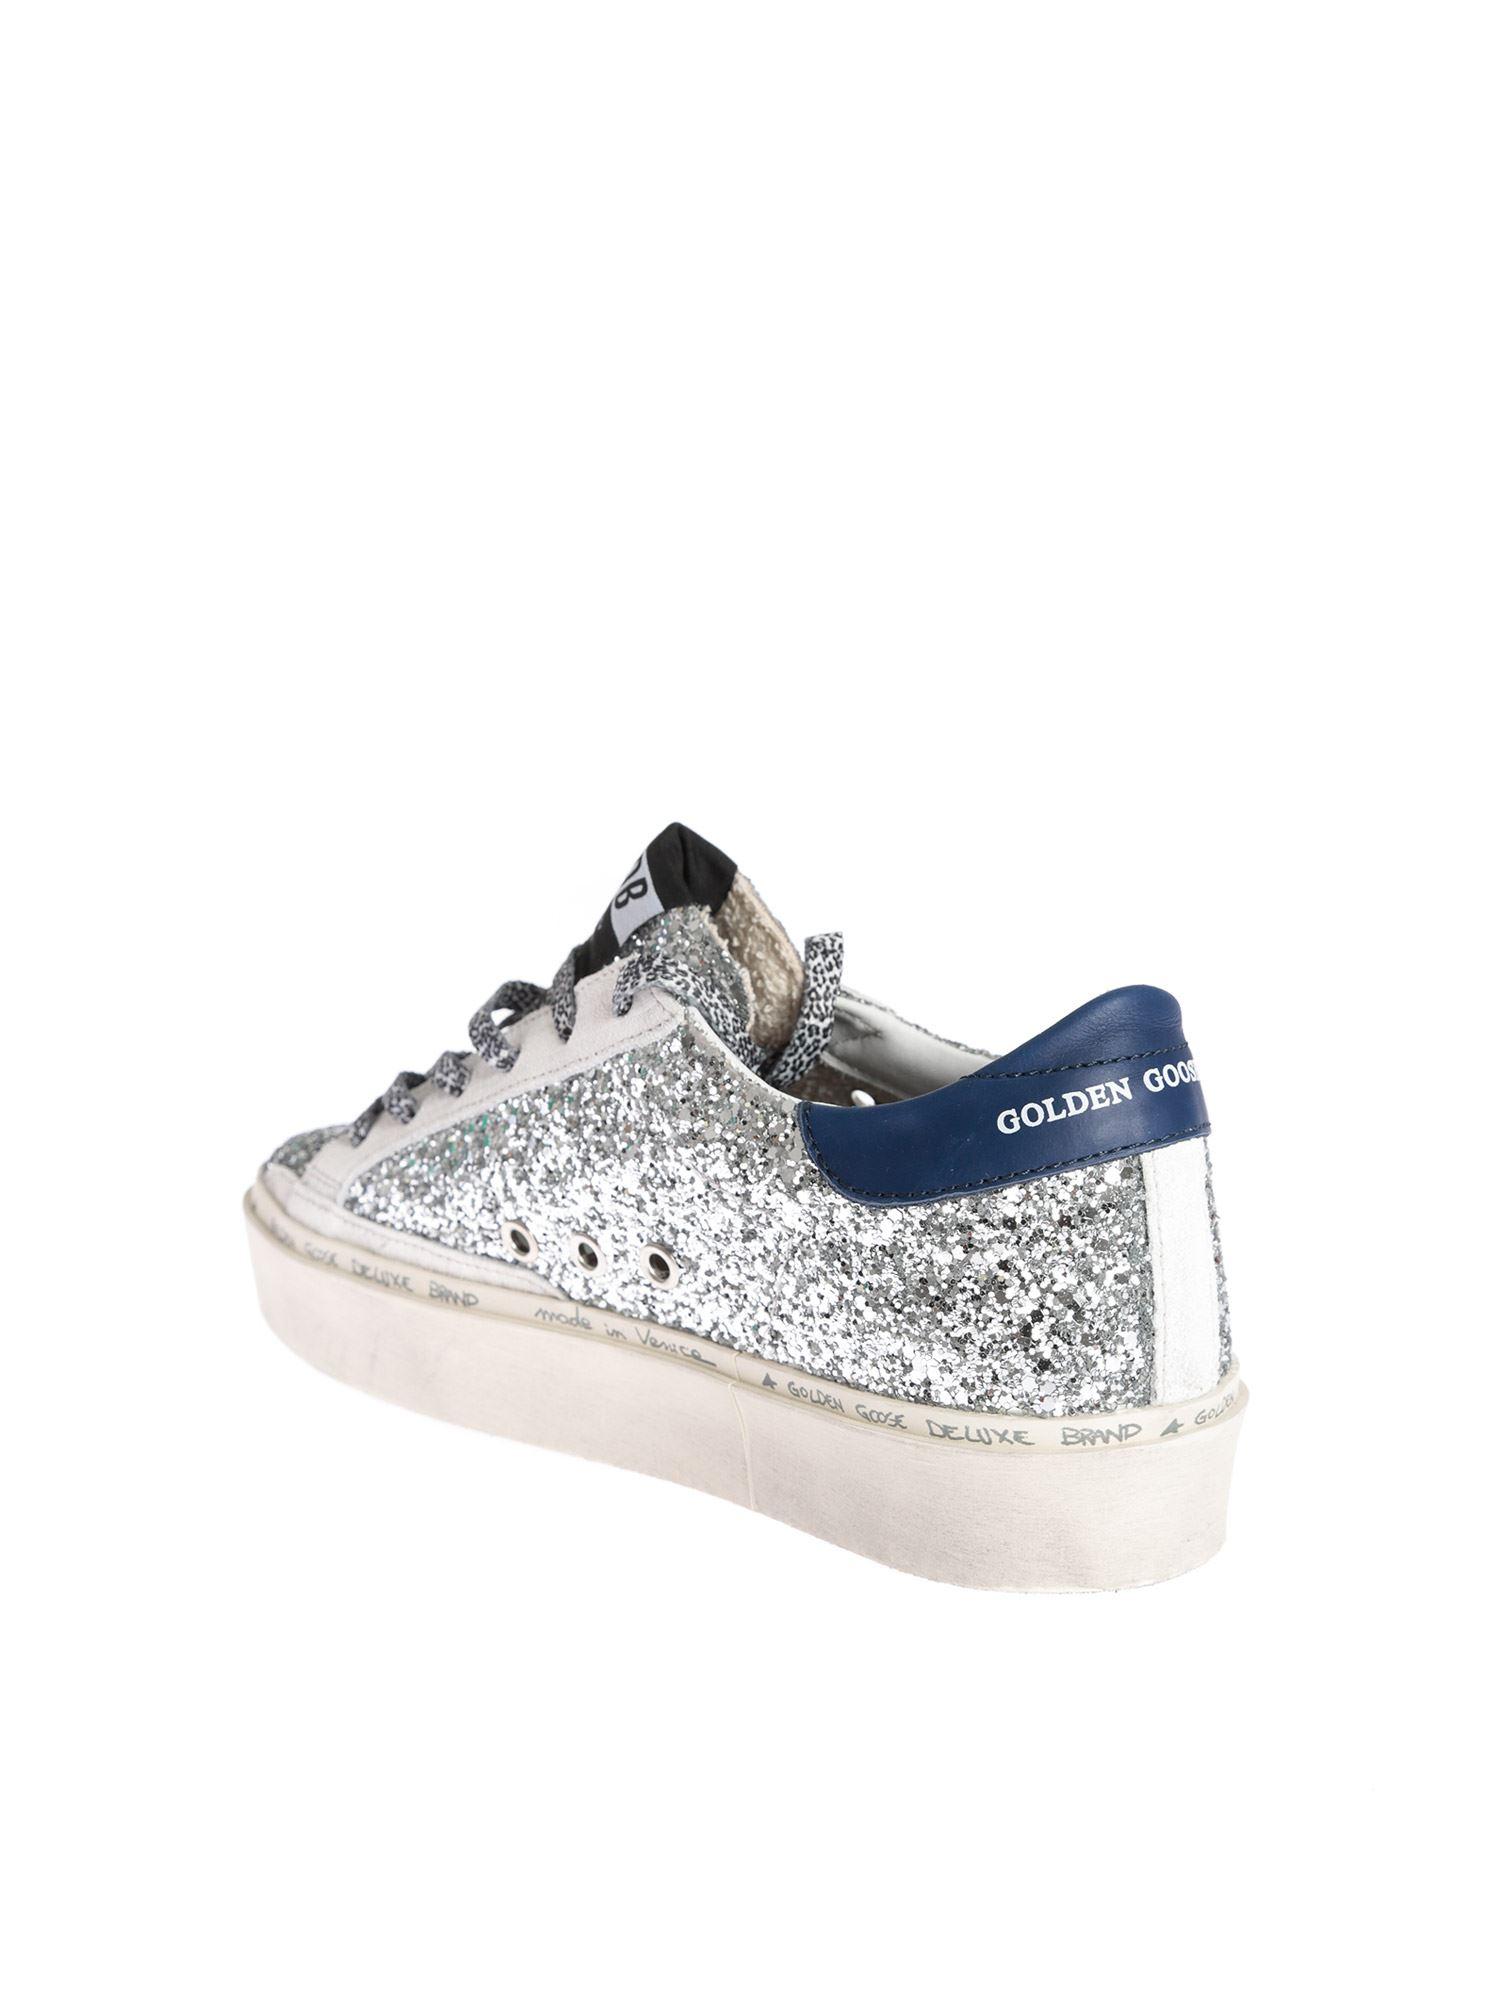 Golden Goose Deluxe Brand Suede Hi Star Sneakers In Silver Glitter With ...